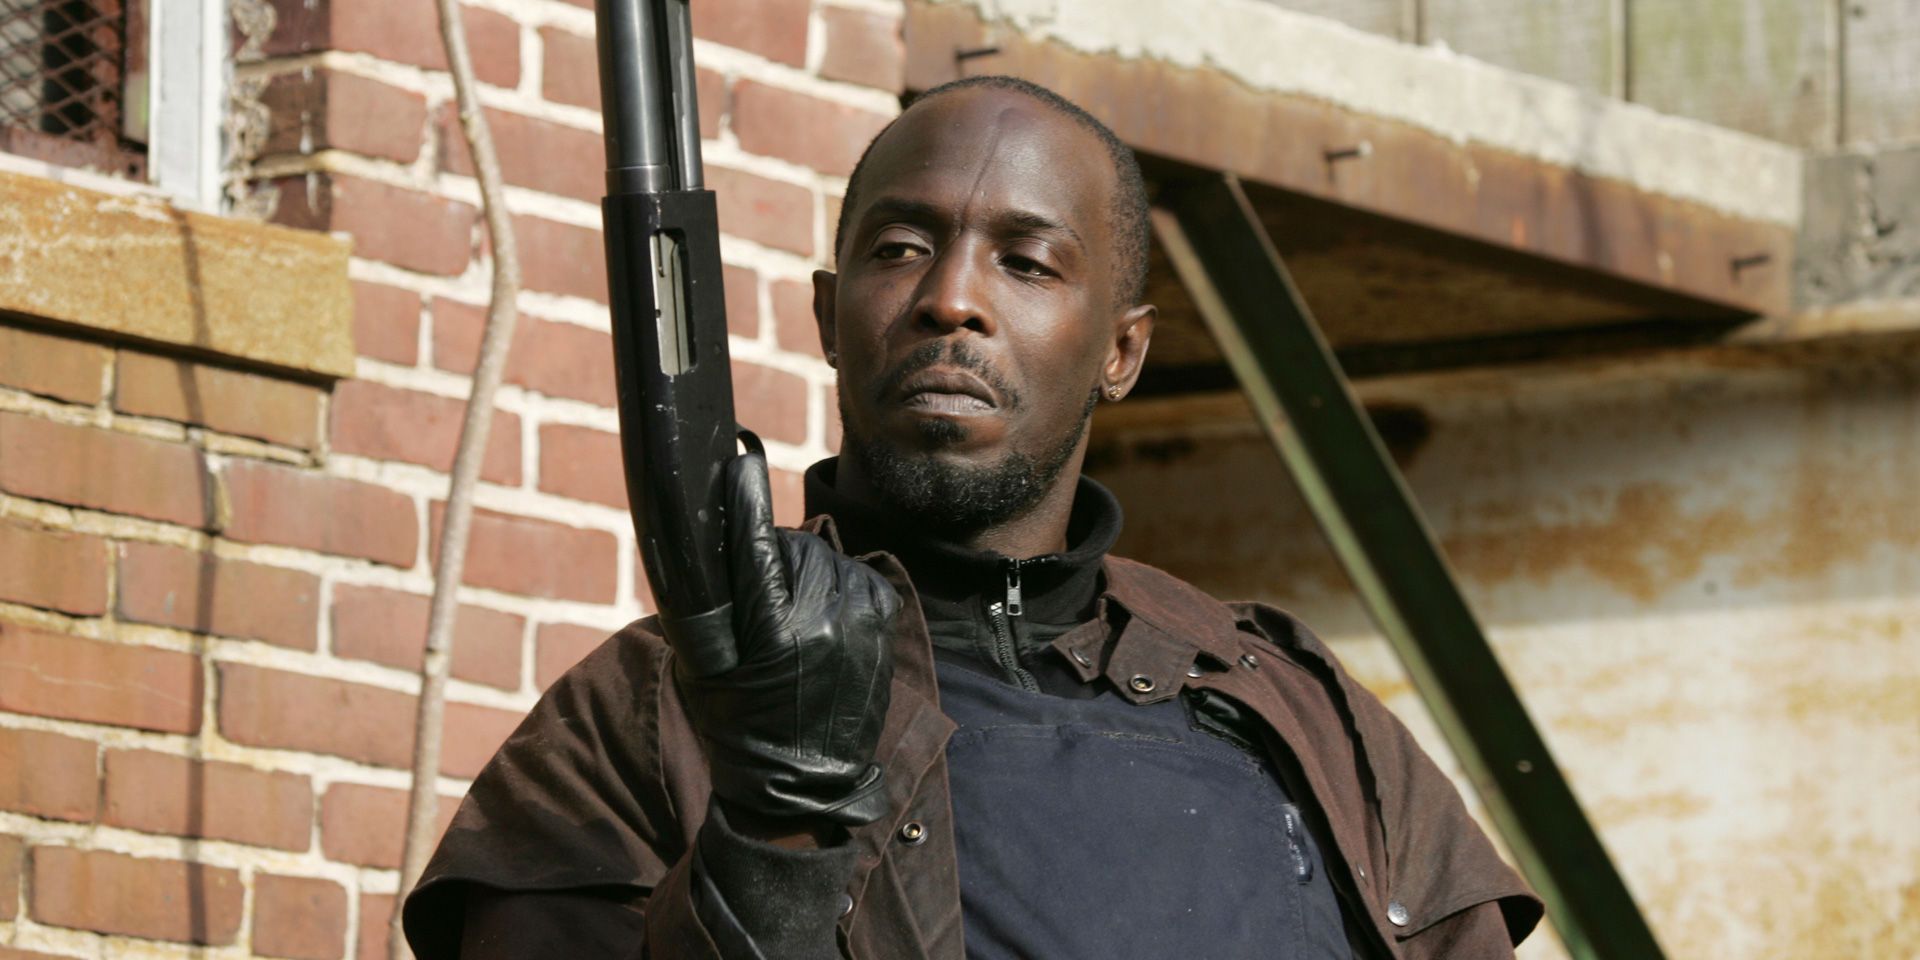 Omar Little (Michael Kenneth Williams) cocks a shotgun outside housing projects in The Wire.